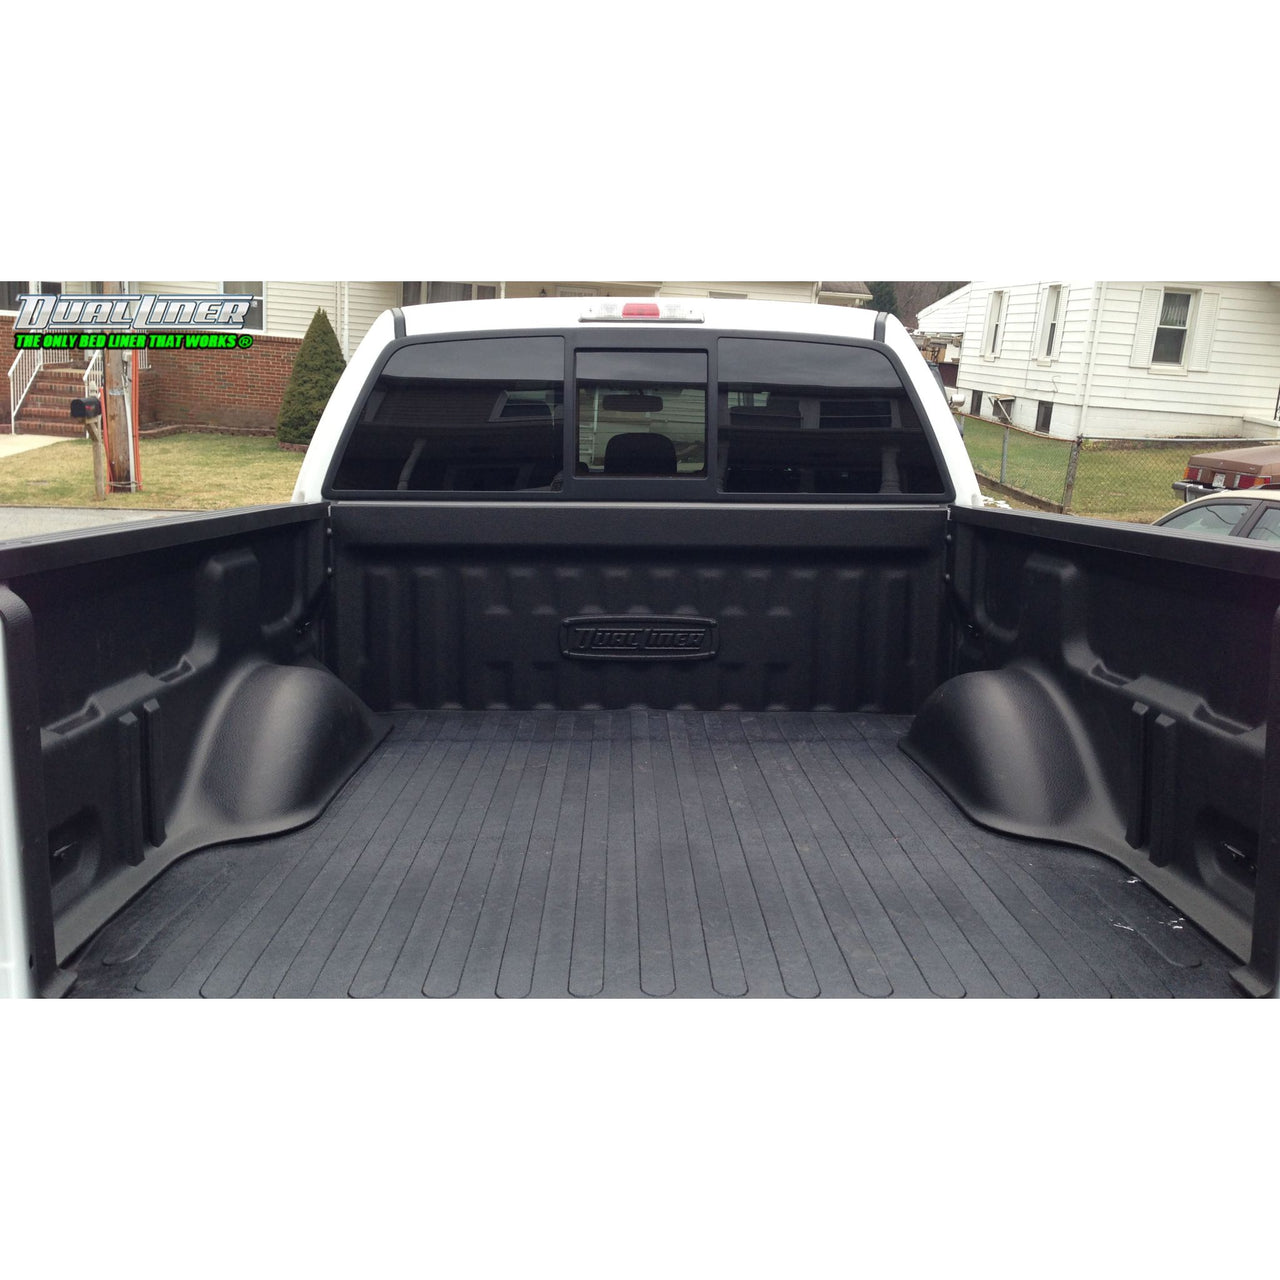 DualLiner 2021 to 2022 F-150 (WITH LED Light Bar & Power Outlet) - Regular 6.5' Bed